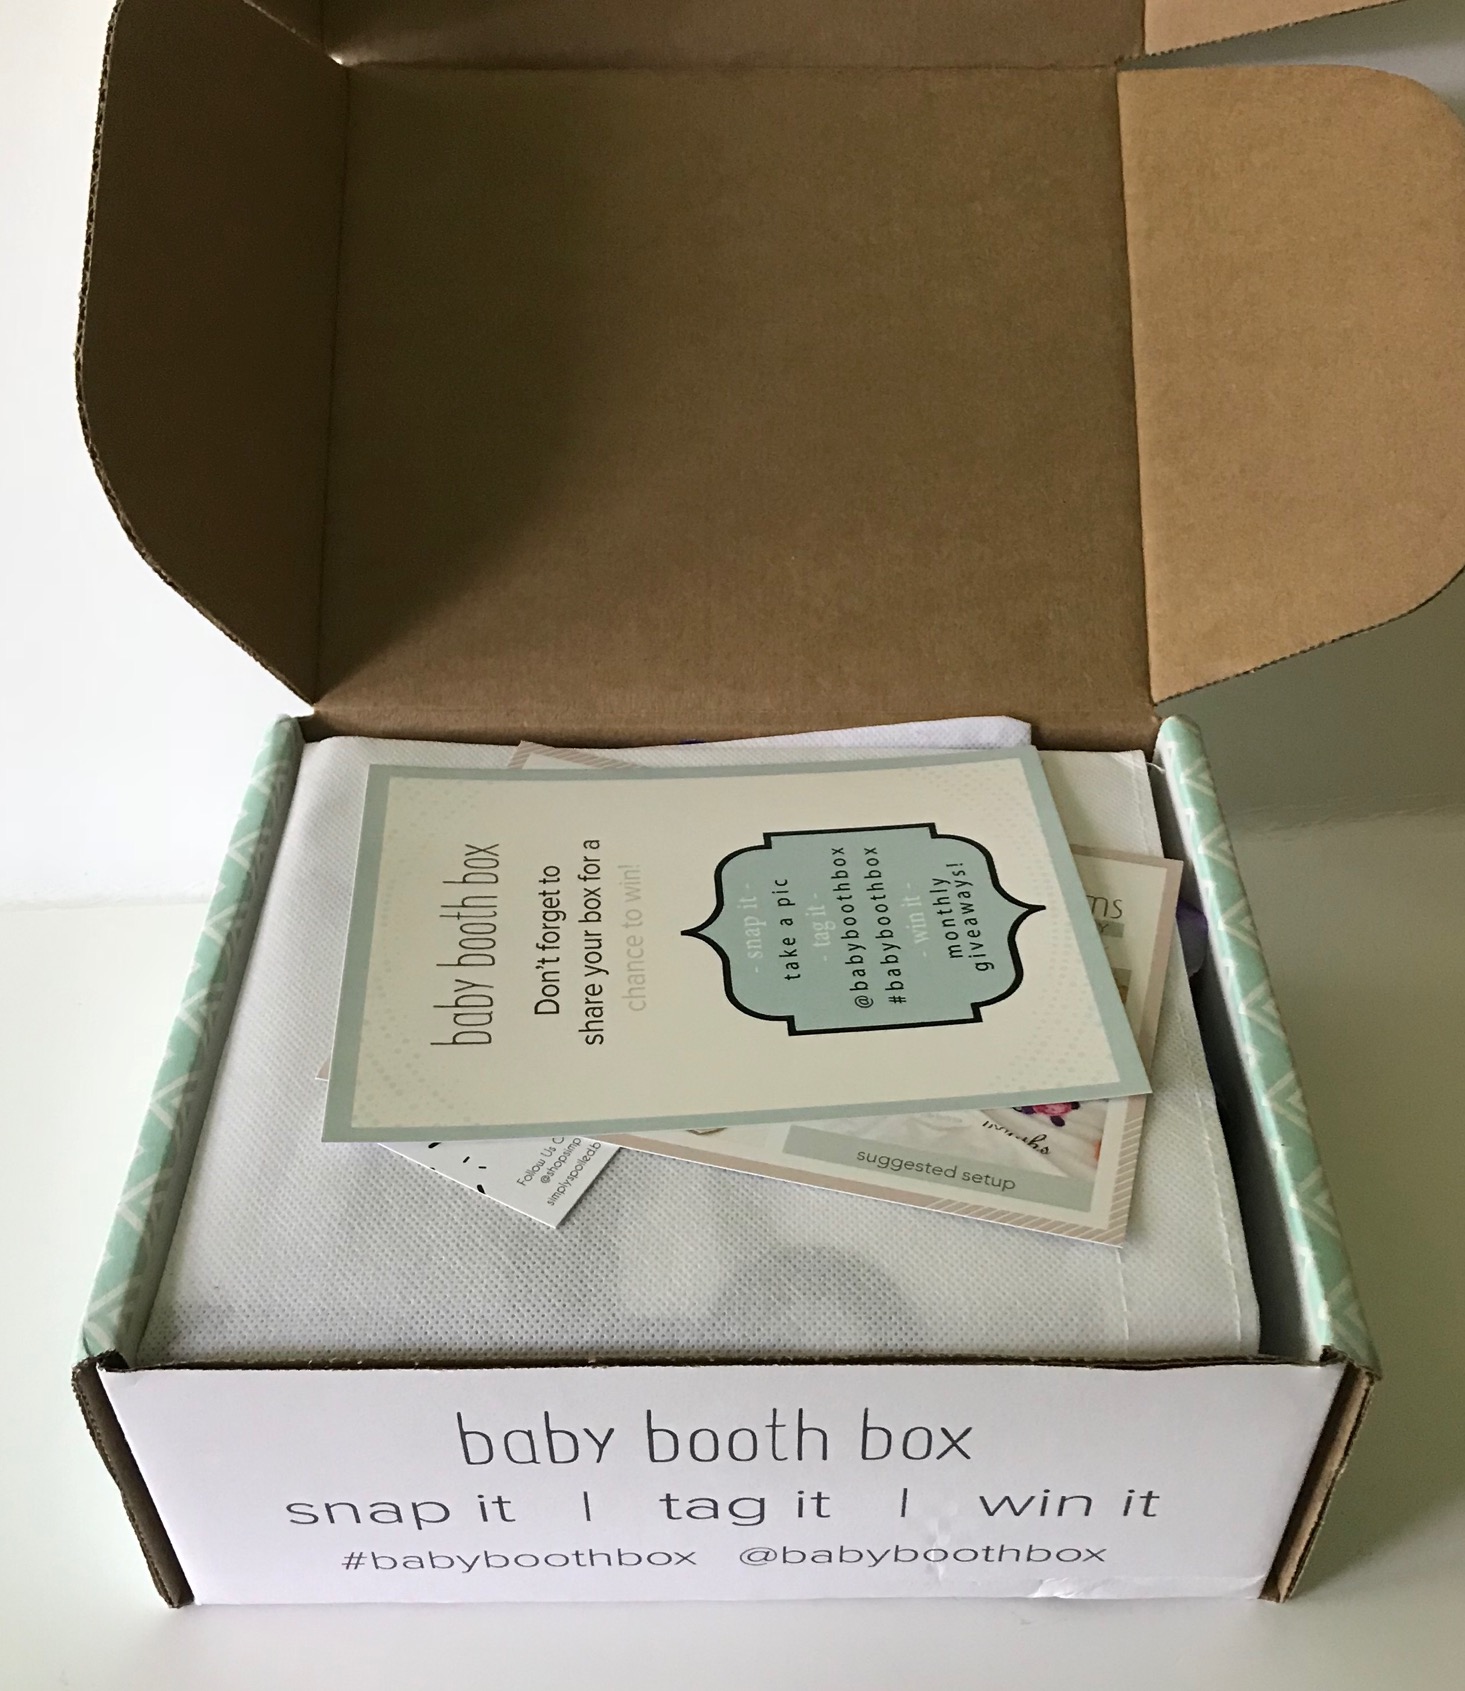 Baby Booth Box Subscription Review + Coupon – June 2018